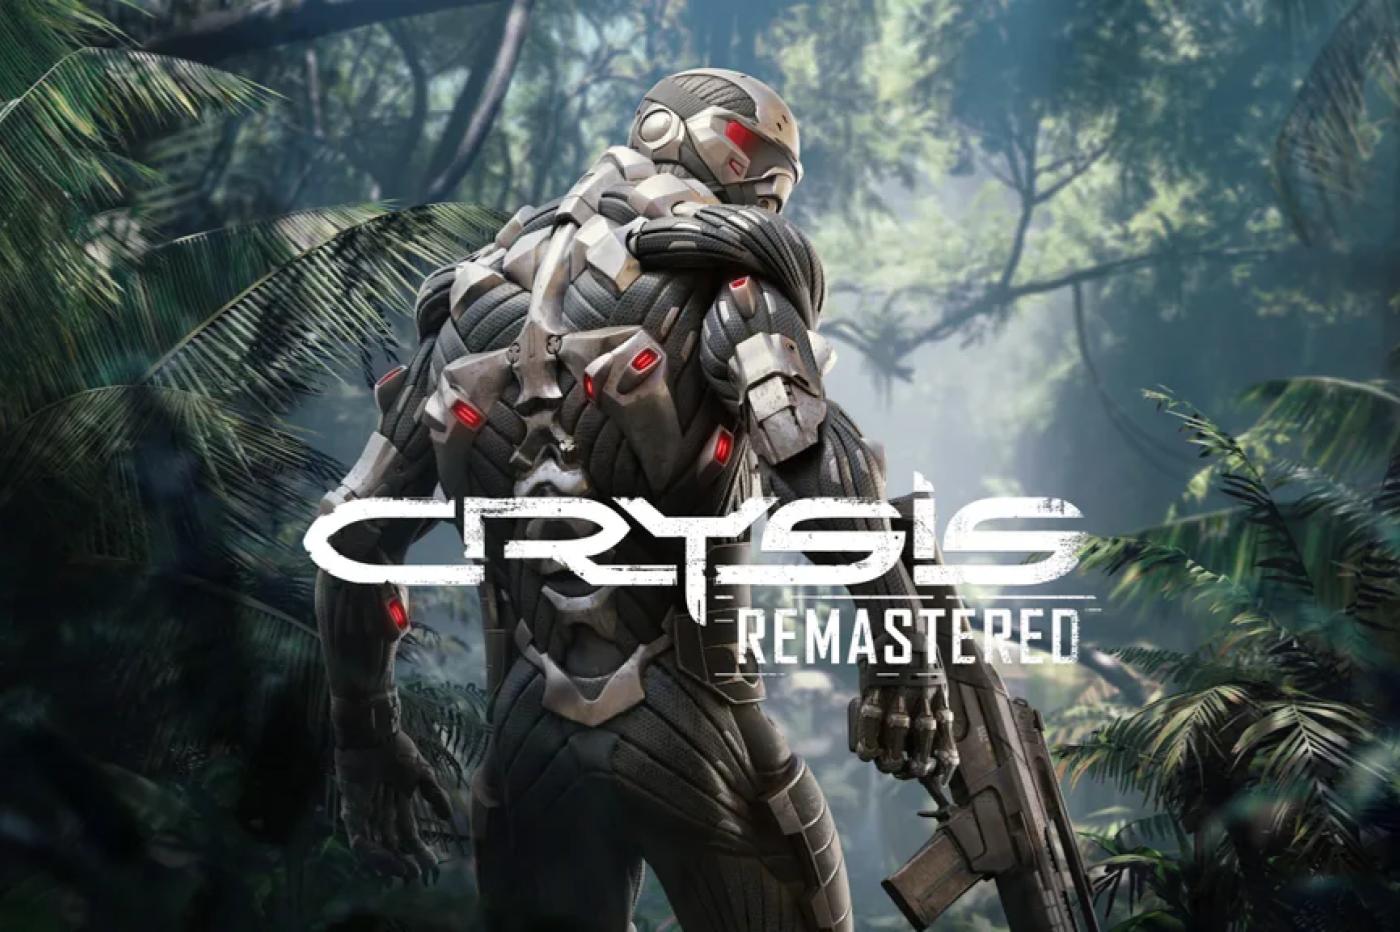 crysis playstation now mars